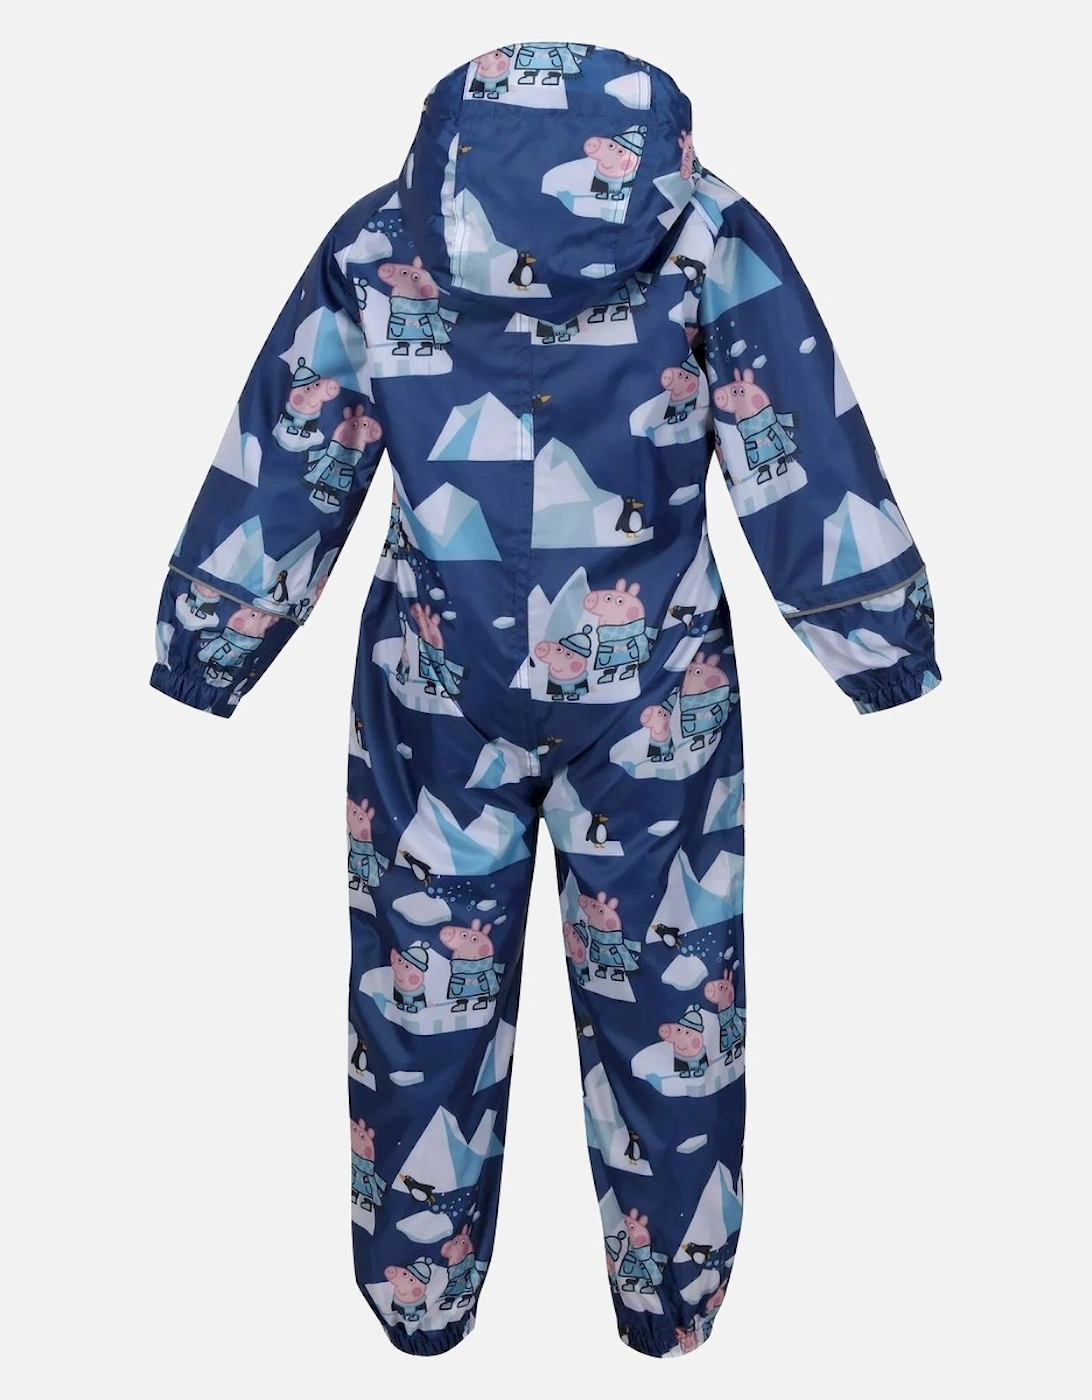 Childrens/Kids Pobble Peppa Pig Puddle Suit